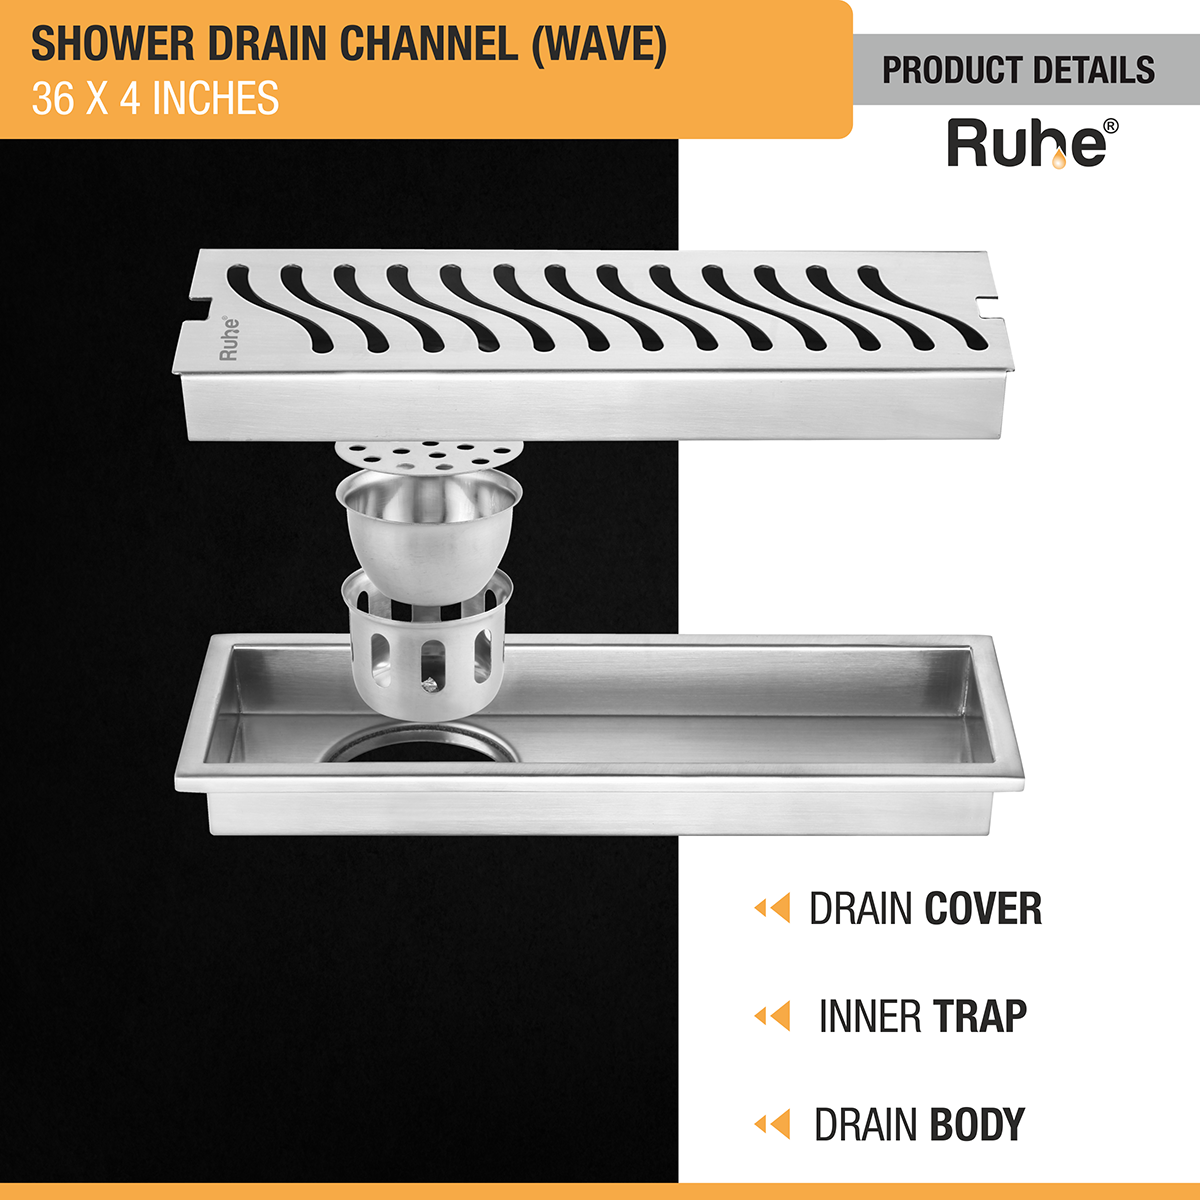 Wave Shower Drain Channel (36 X 4 Inches) with Cockroach Trap (304 Grade) product details